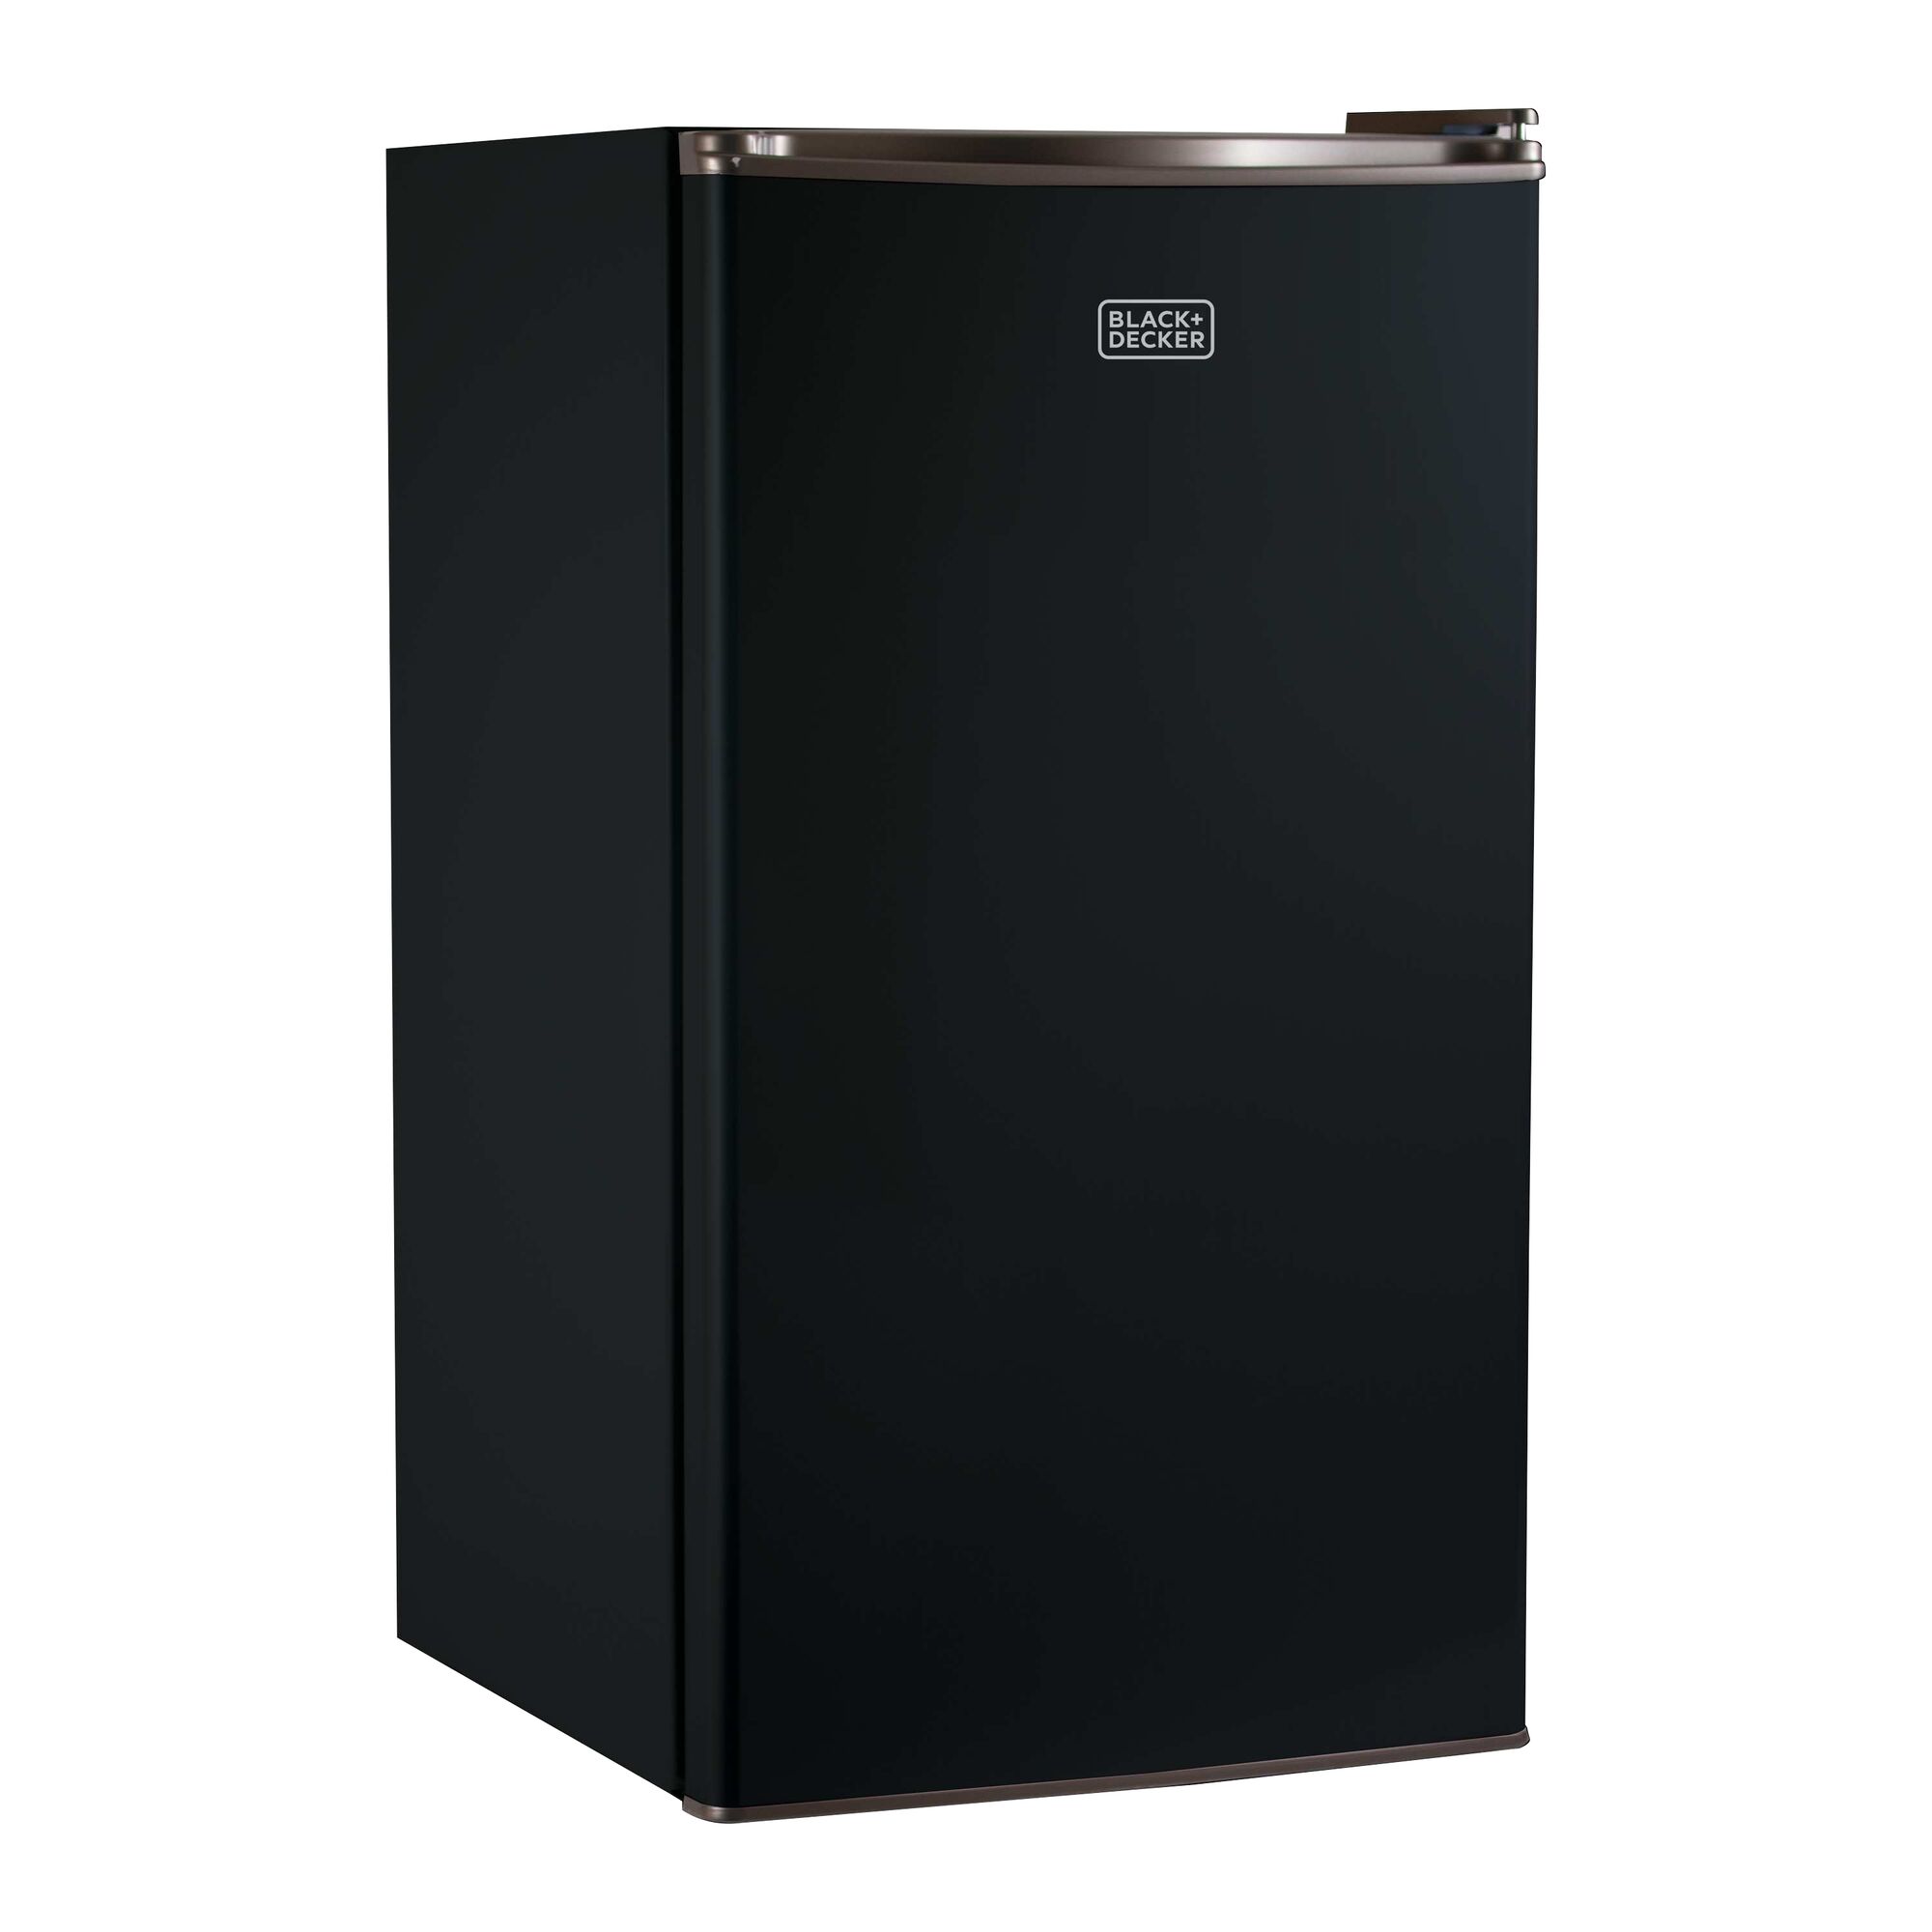 Profile of 3 and two tenth cubic foot Energy Star Refrigerator with Freezer.